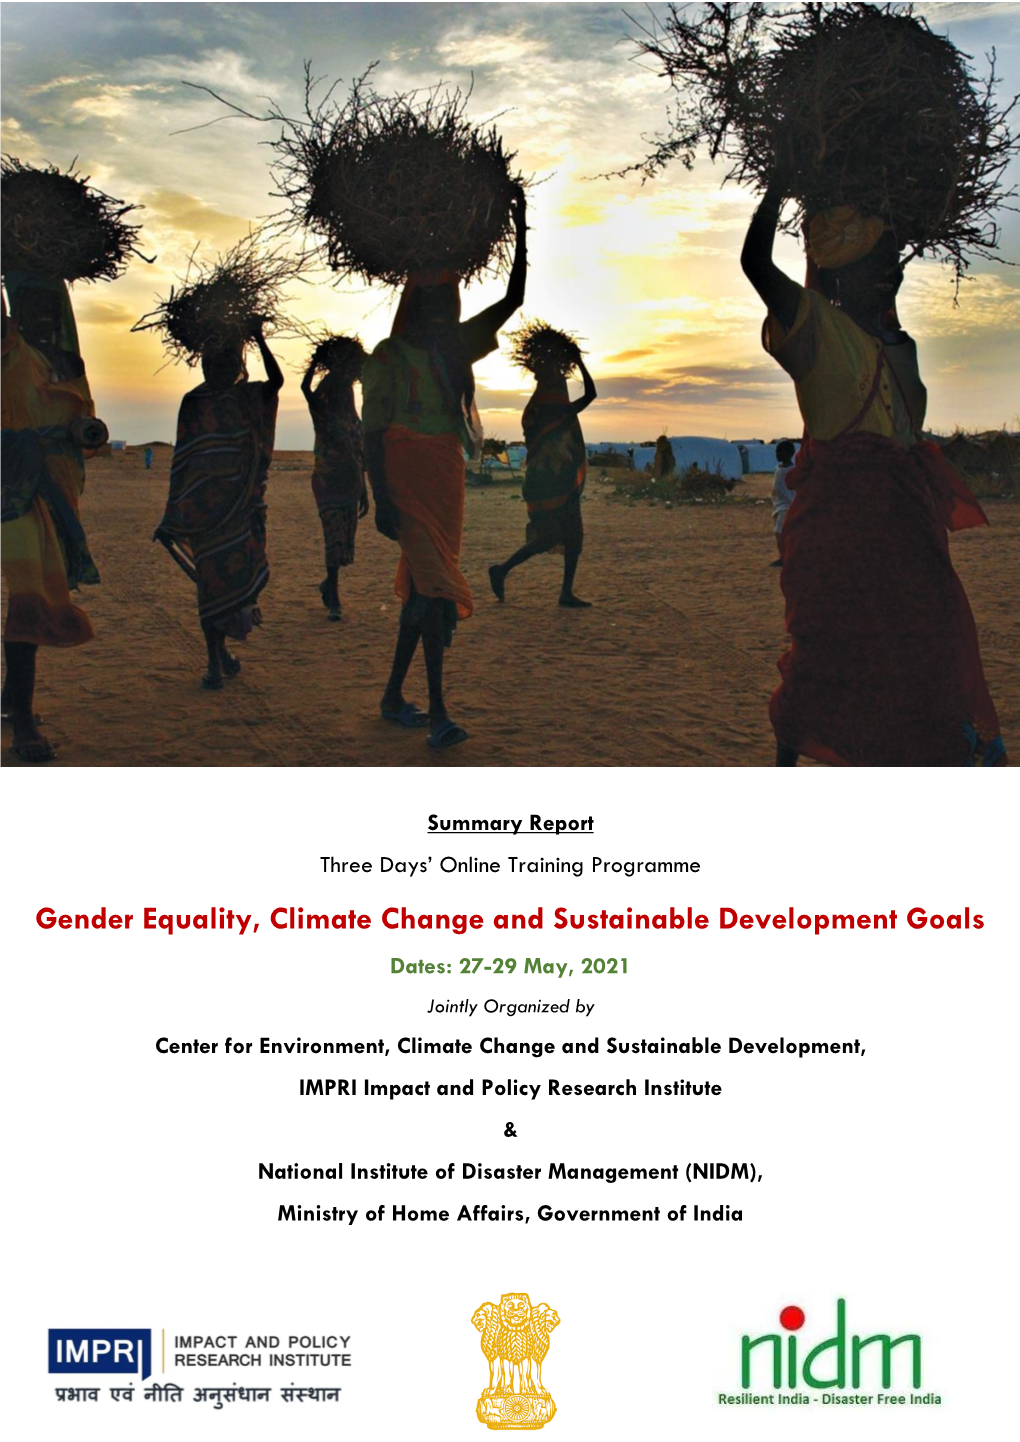 Gender Equality, Climate Change and Sustainable Development Goals